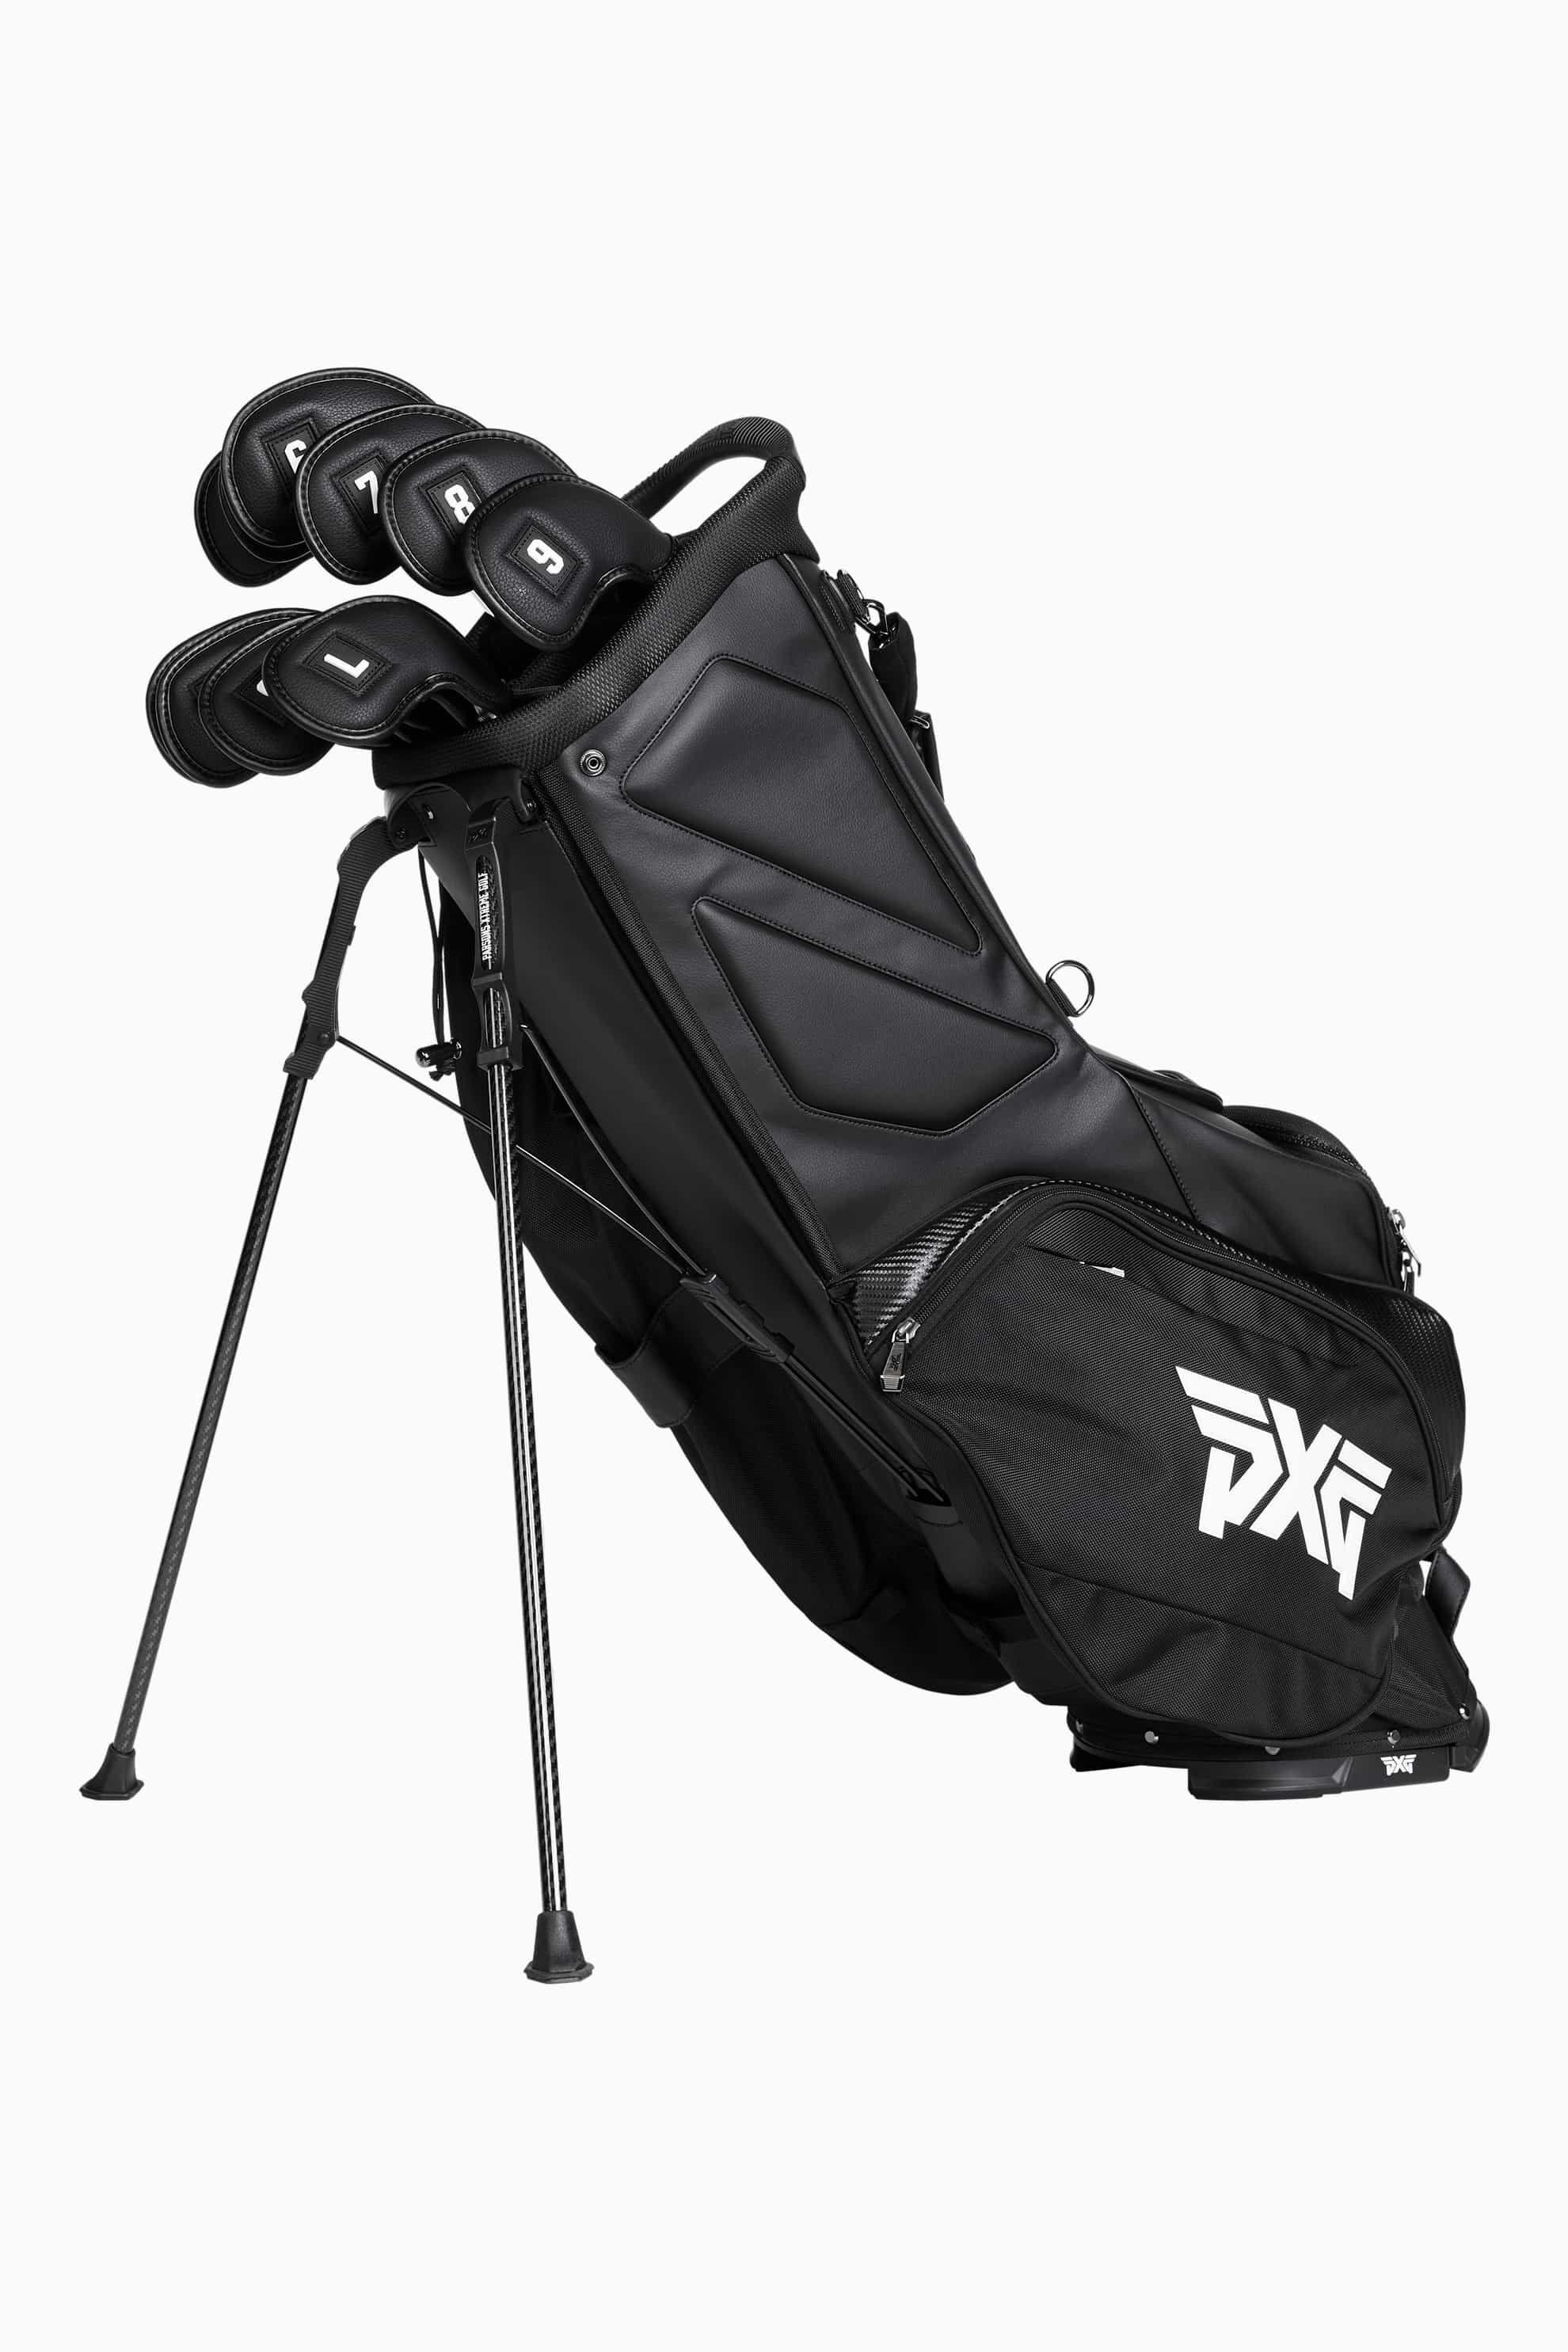 Buy PXG Iron Cover Kit PXG